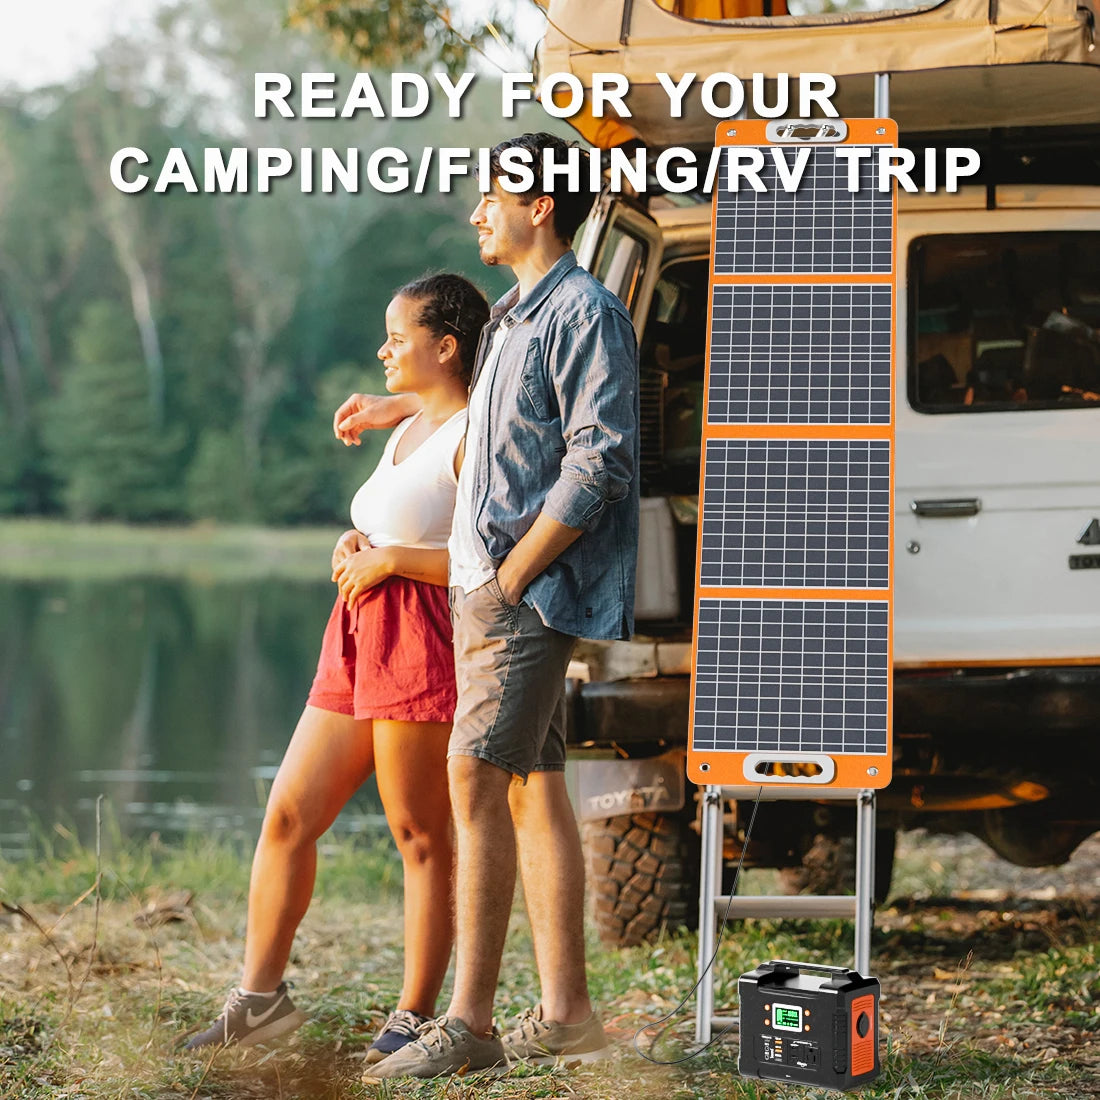 FlashFish Solar Panel, Get ready for your camping or fishing trip with this solar charger